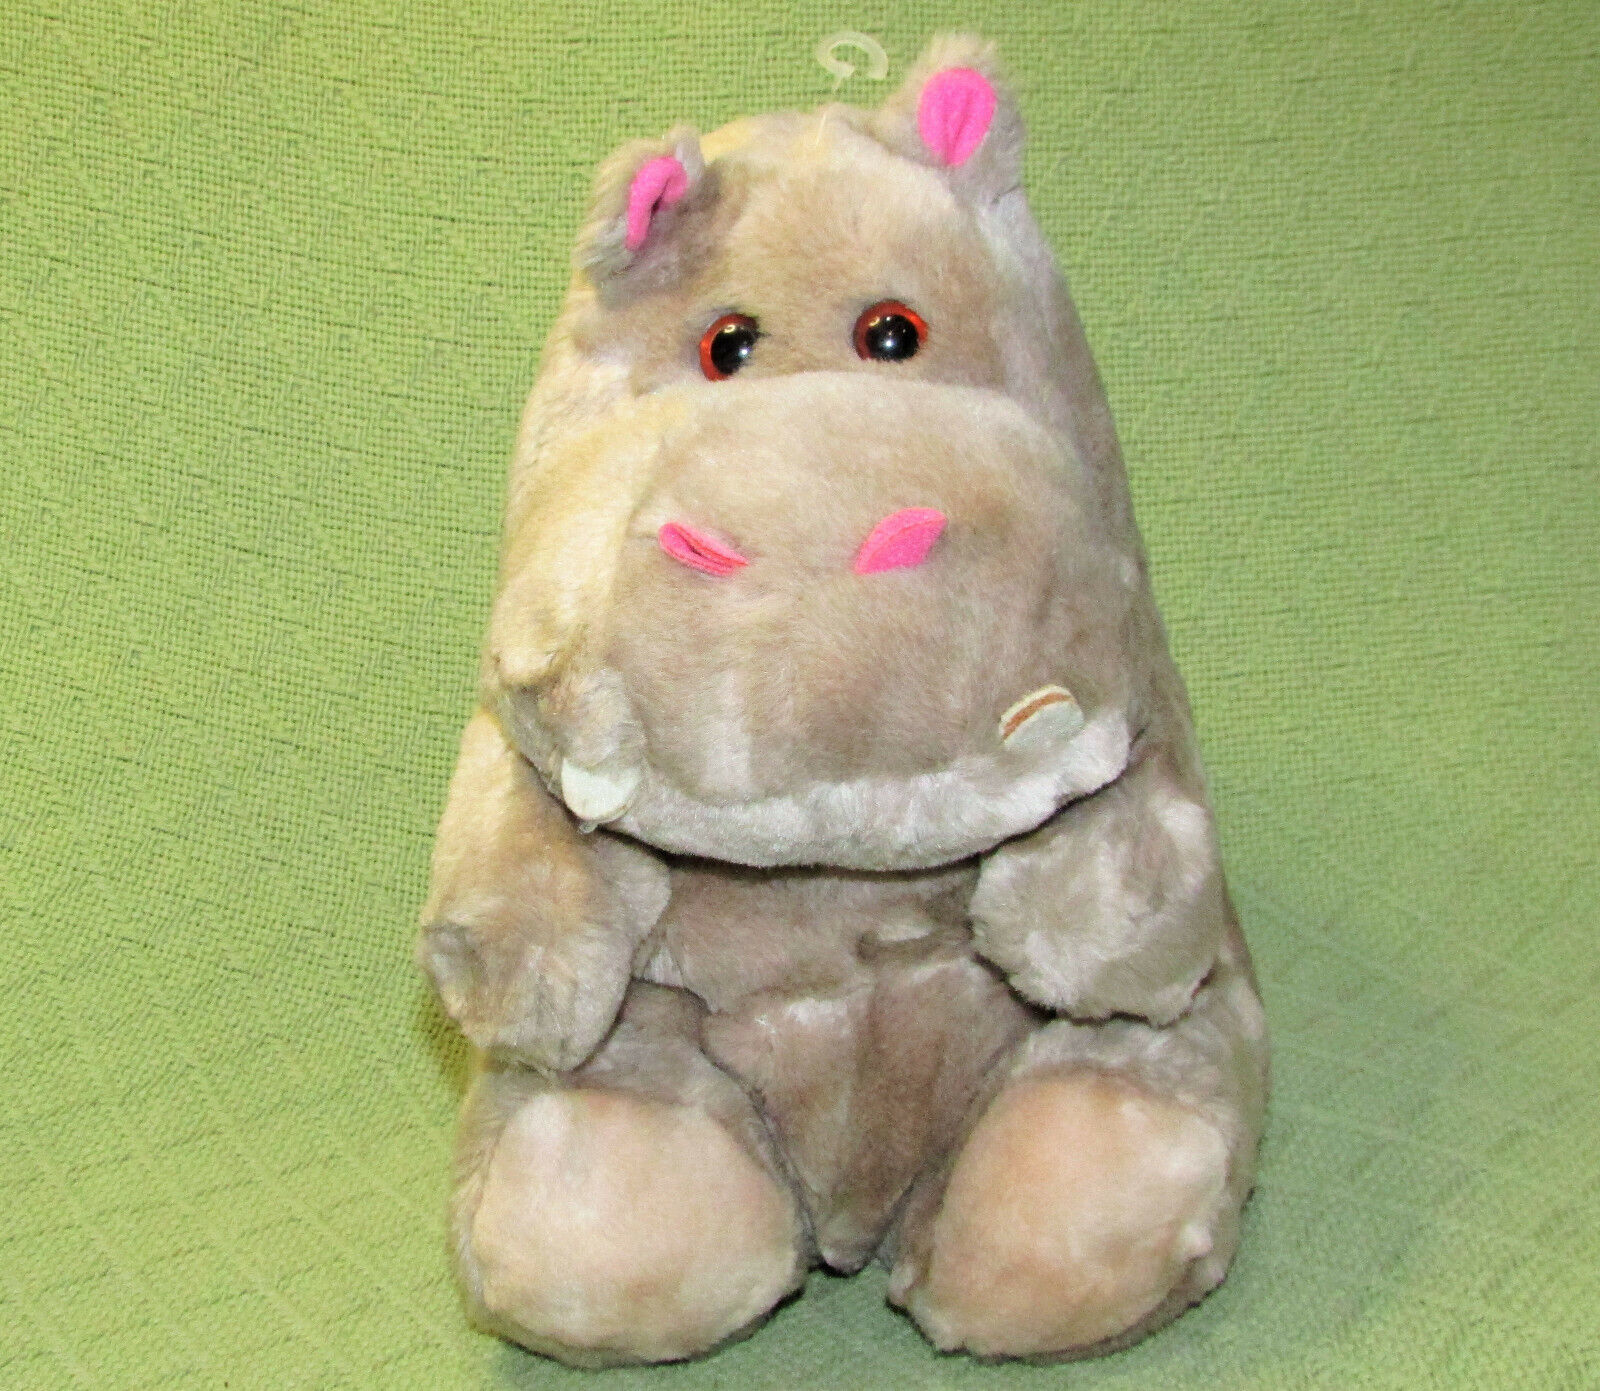 CALTOY HIPPO GREY STUFFED 11" ANIMAL ROLY POLY PLUMP HIPPOPOTOMOS PINK EARS NOSE - $22.50